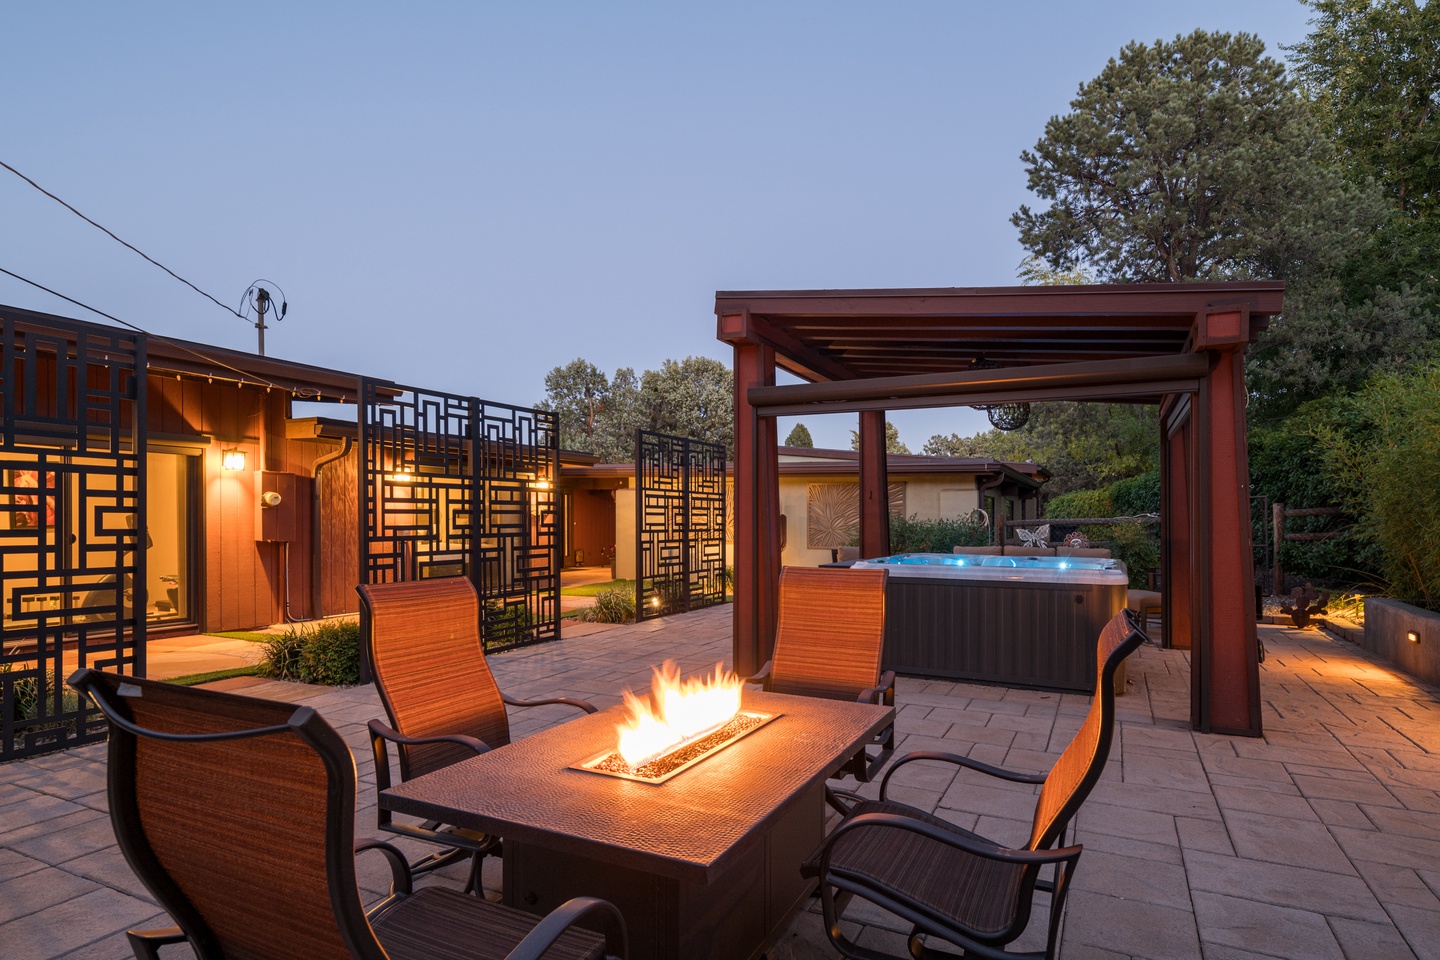 Fire pit for cozy Sedona nights